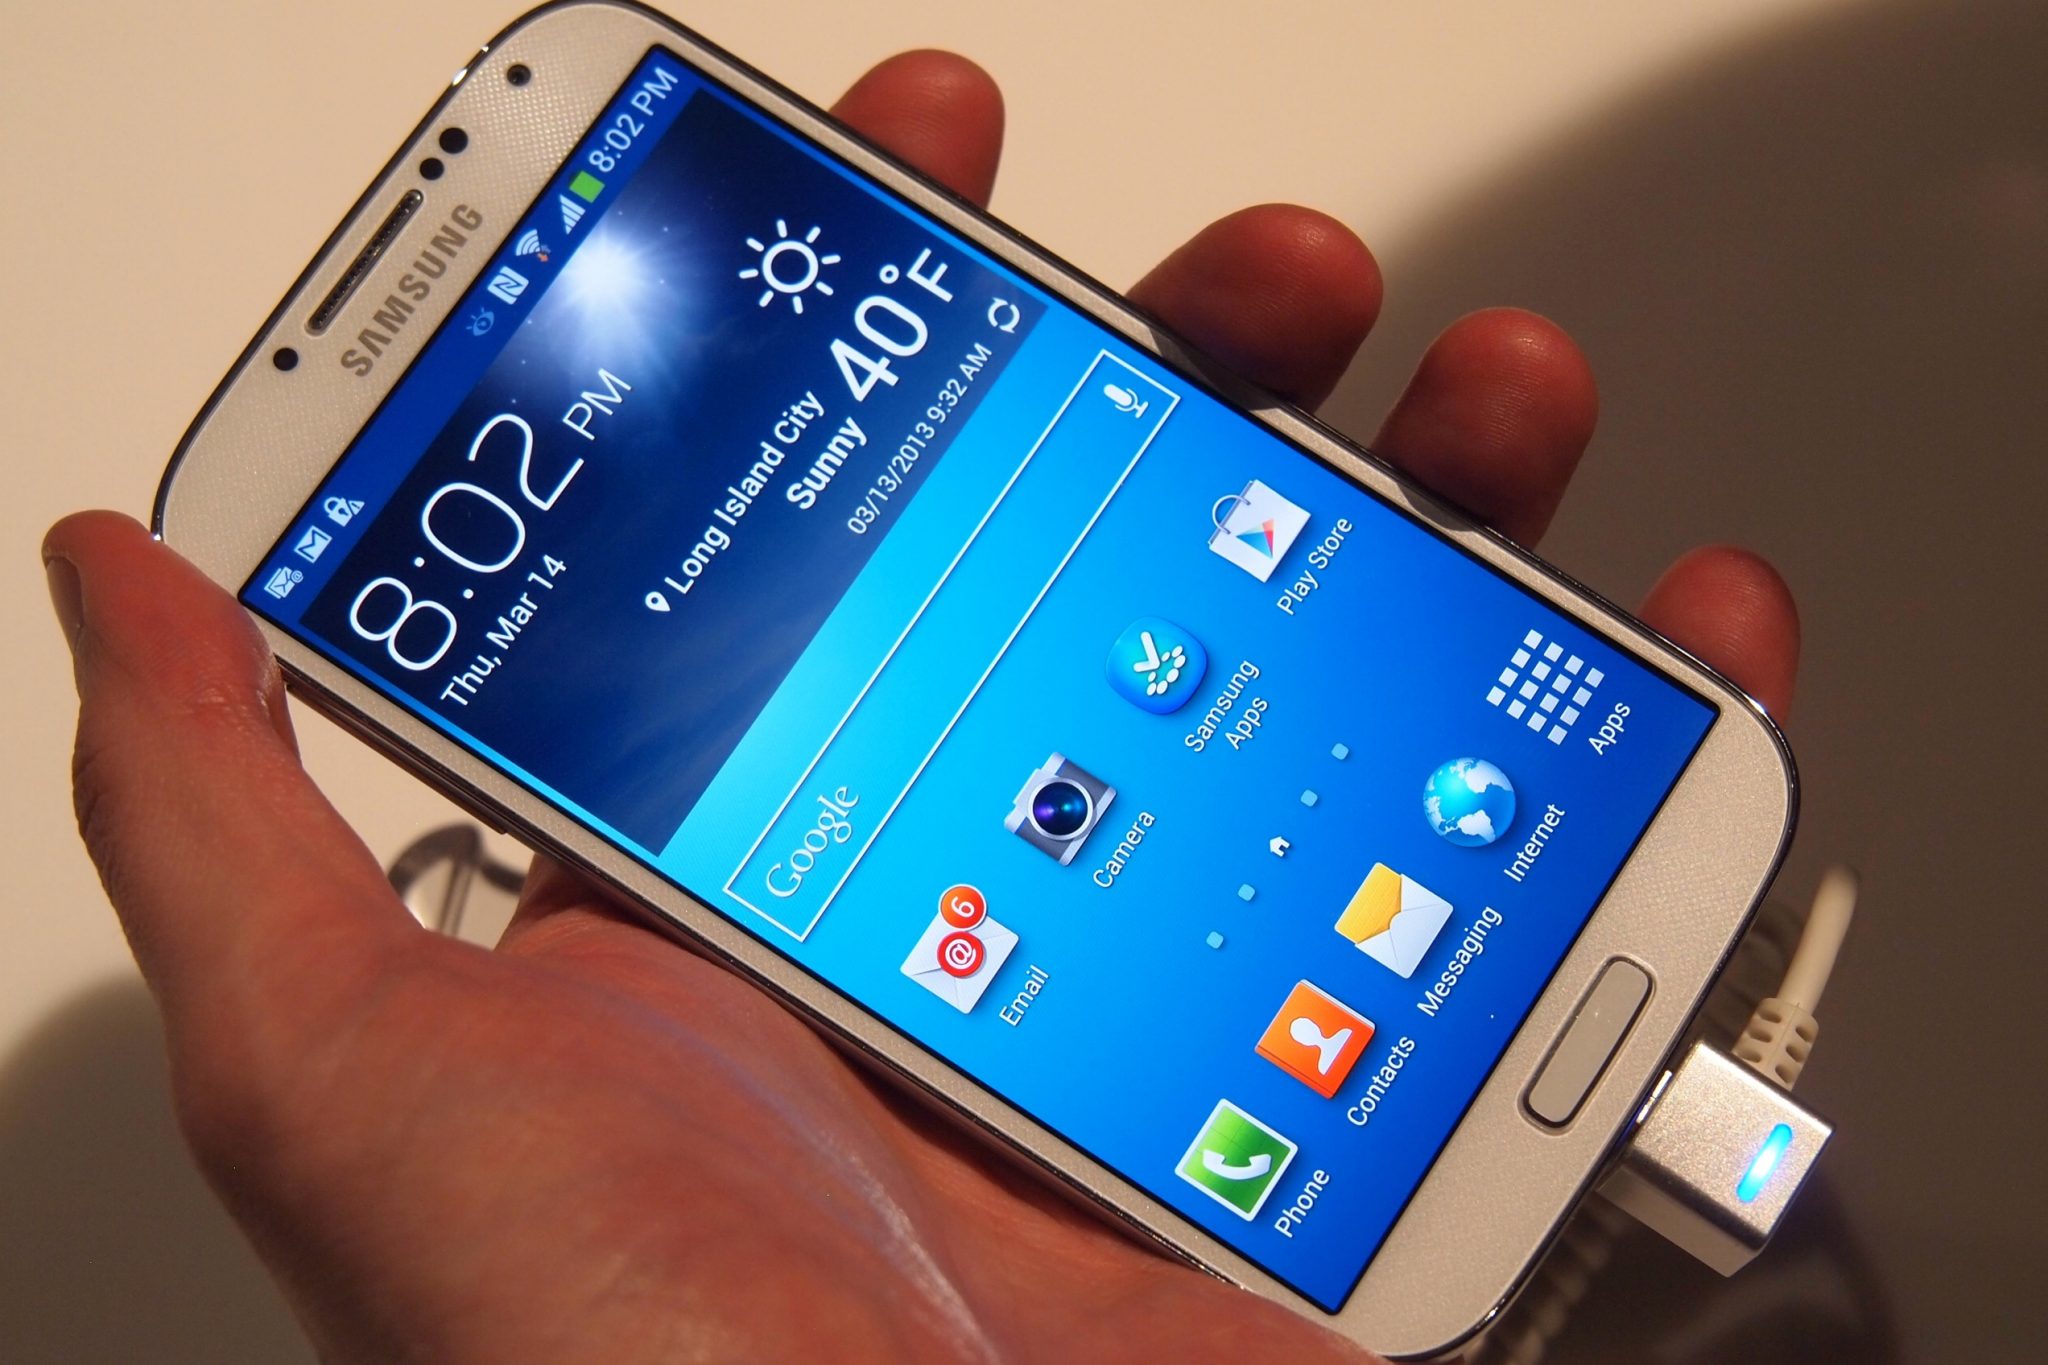 Samsung Galaxy S5 Hardware Costs $50 More Than iPhone 5S